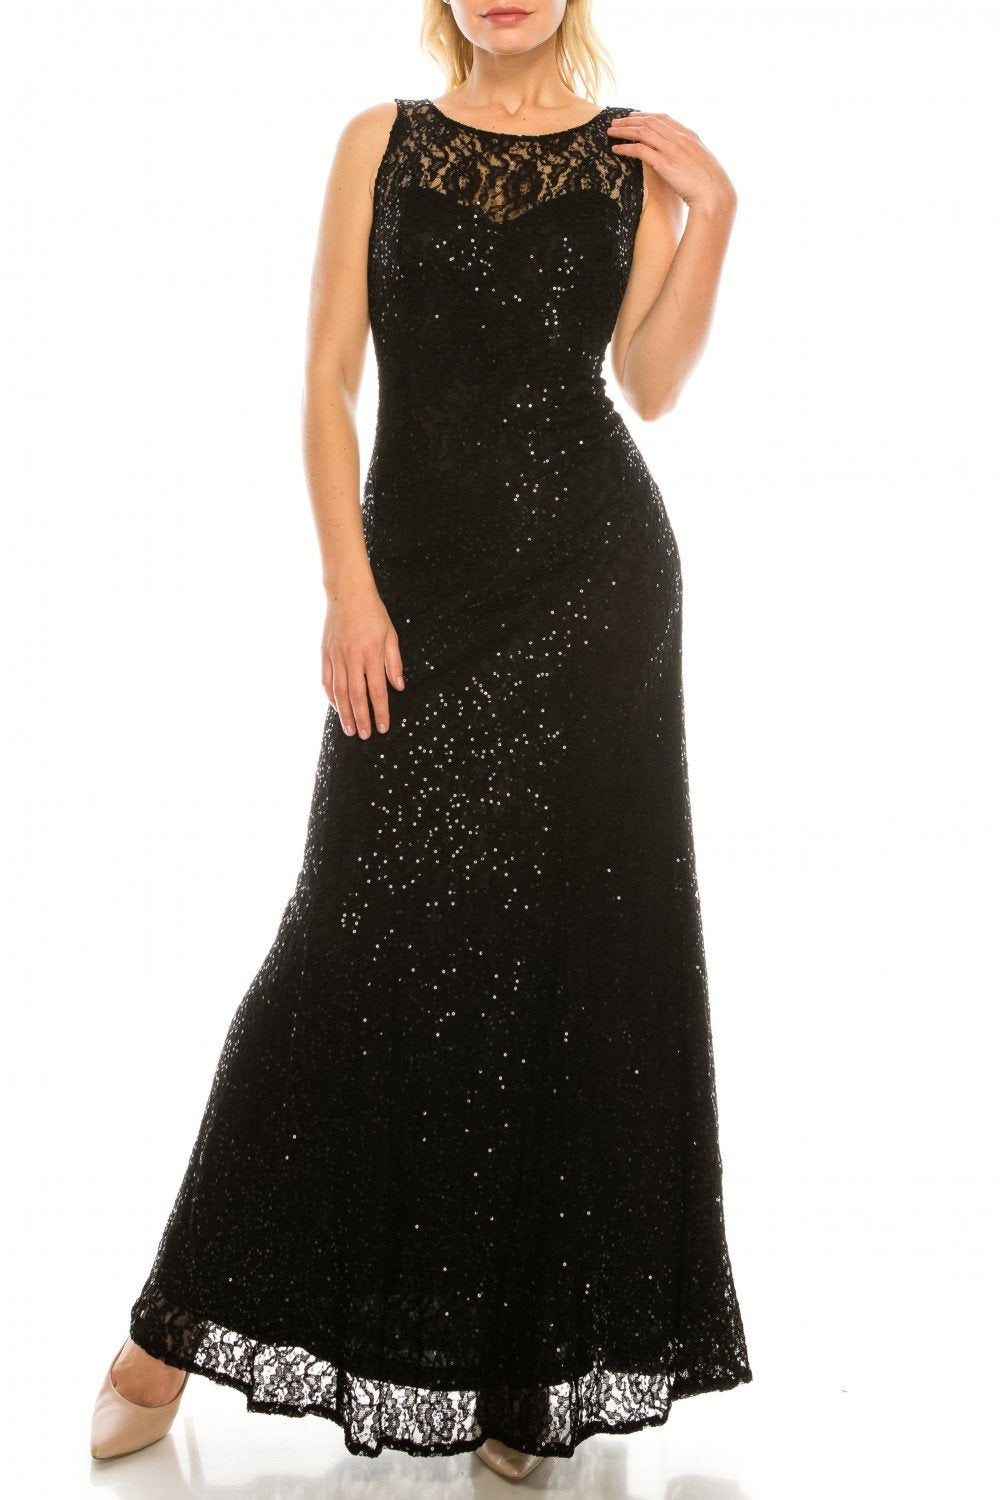 Ignite Evenings - 3802R Sequined Lace Cutout Back Sheath Gown In Black